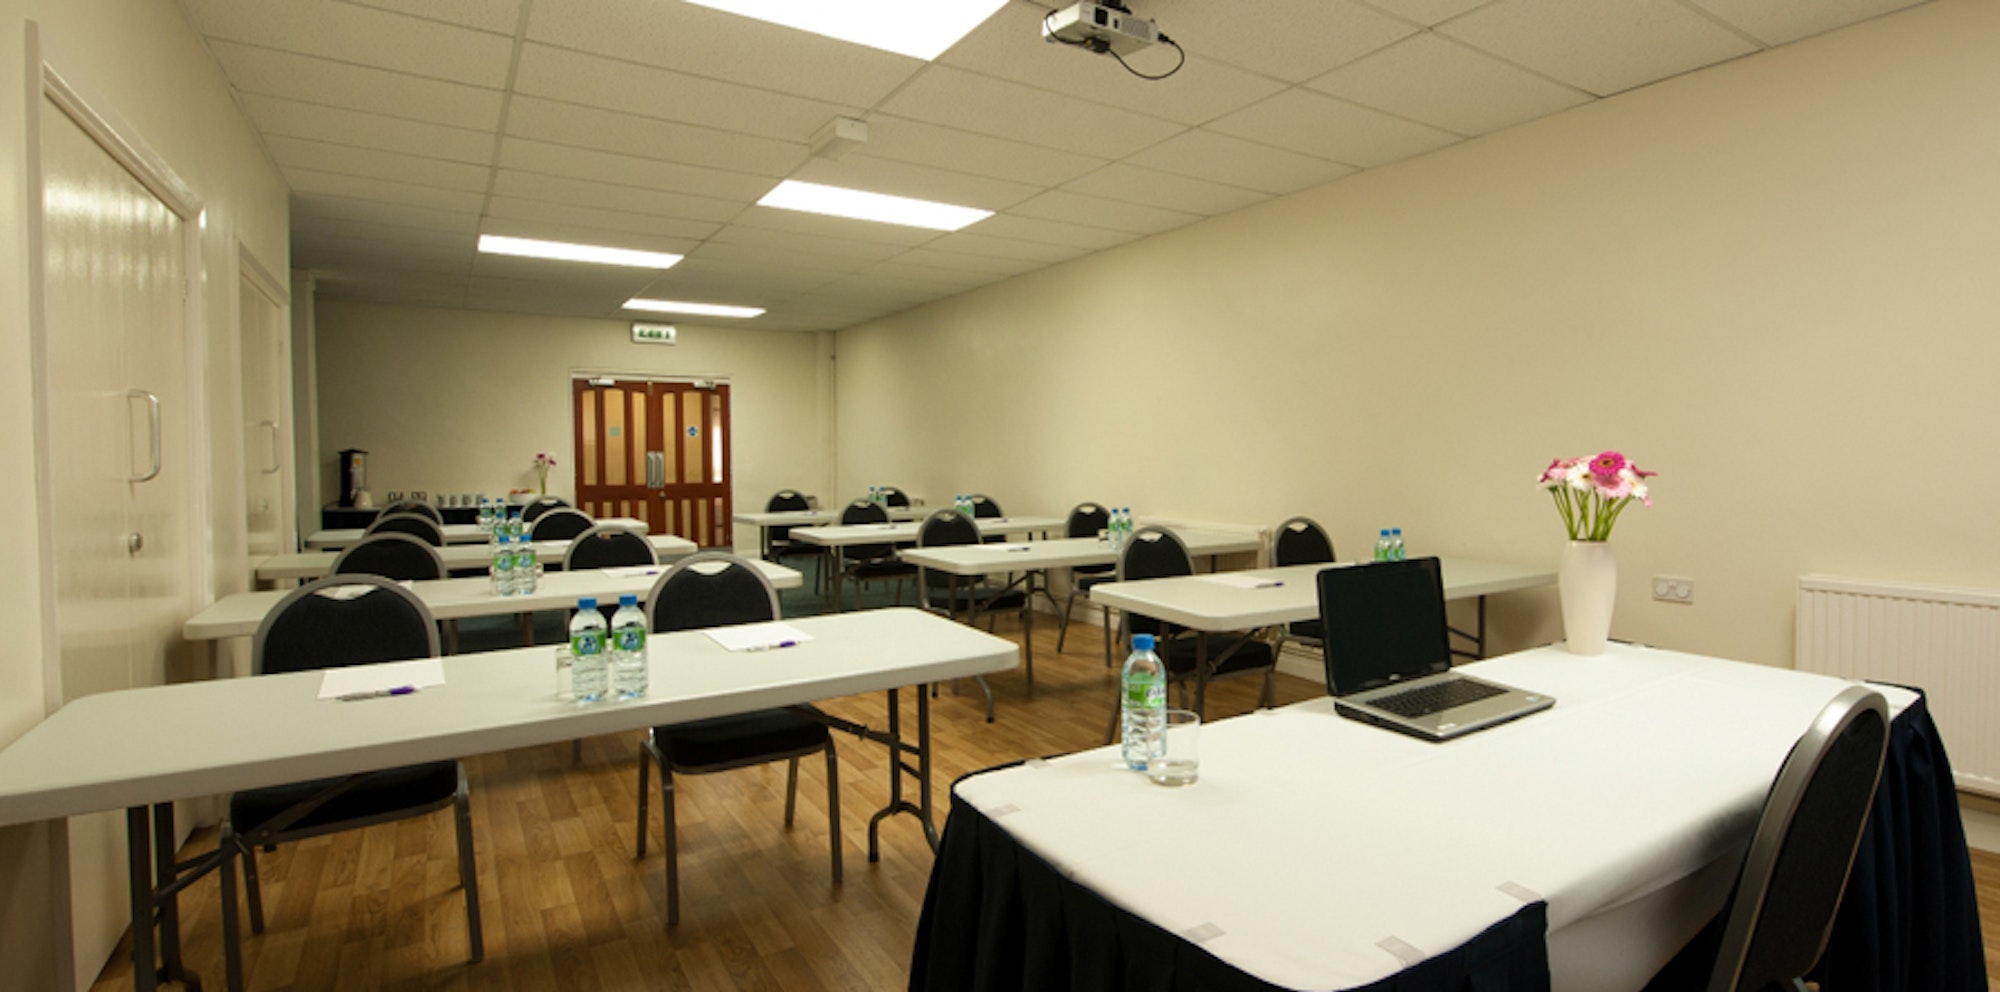 Training Rooms Venues in Manchester - King's House Conference Centre